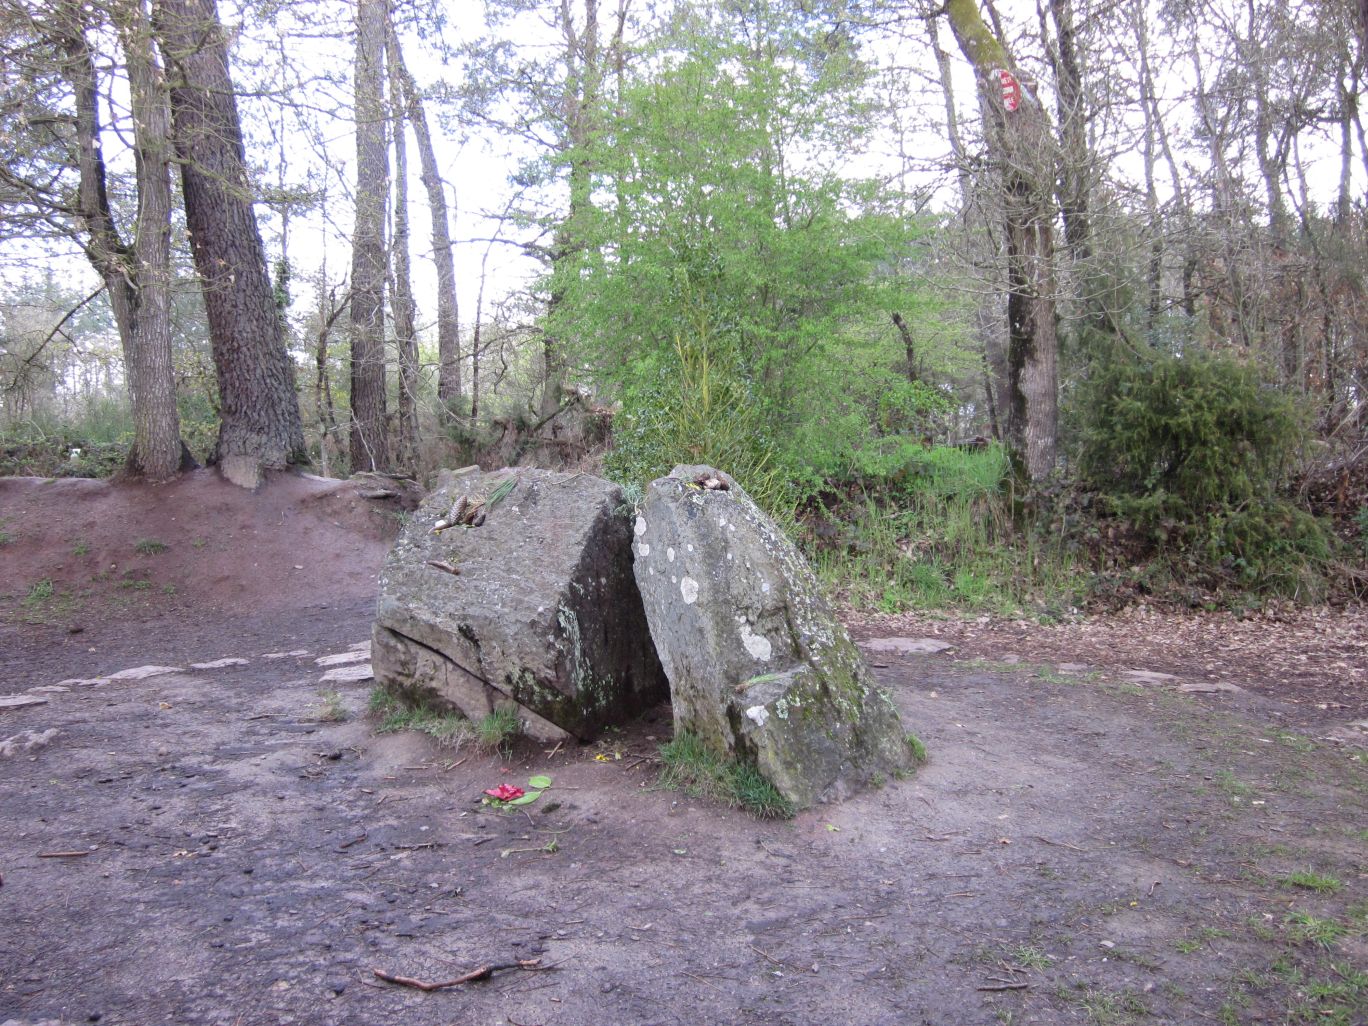 So-called Merlin’s tomb, Forest of Paimpont © Wendy Mewes